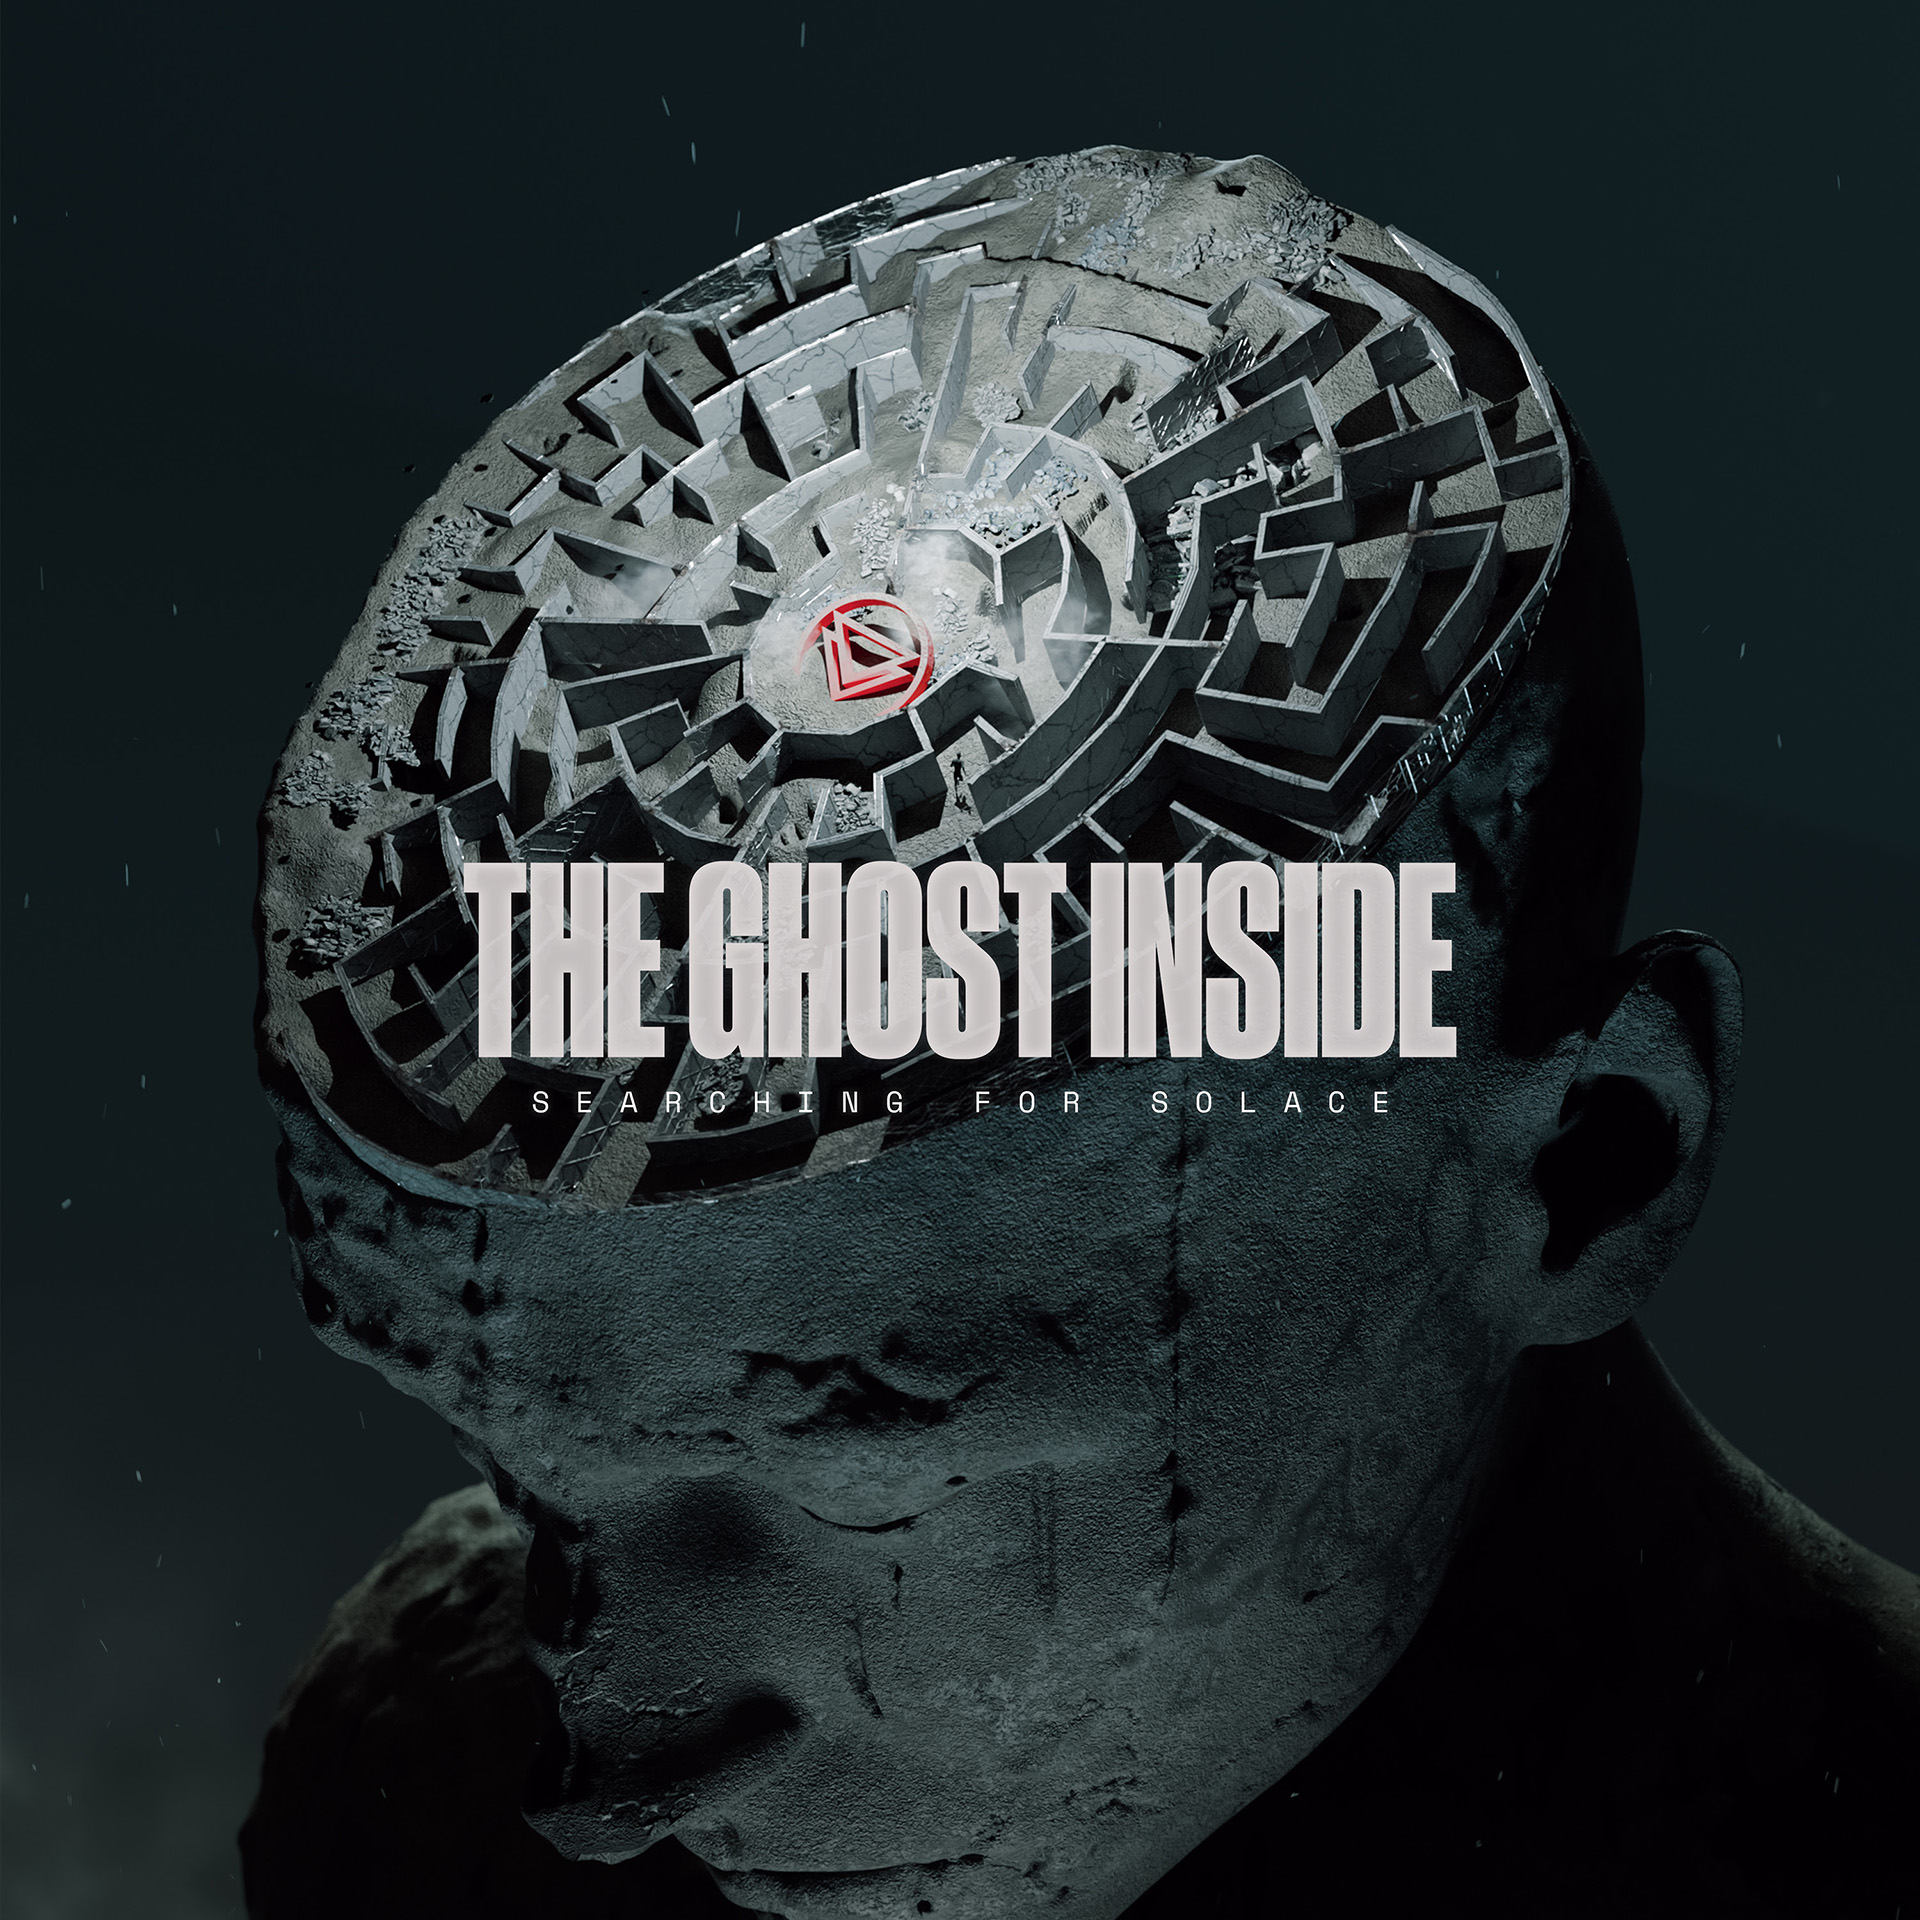 The Ghost Inside ‘Searching For Solace’ Album Artwork